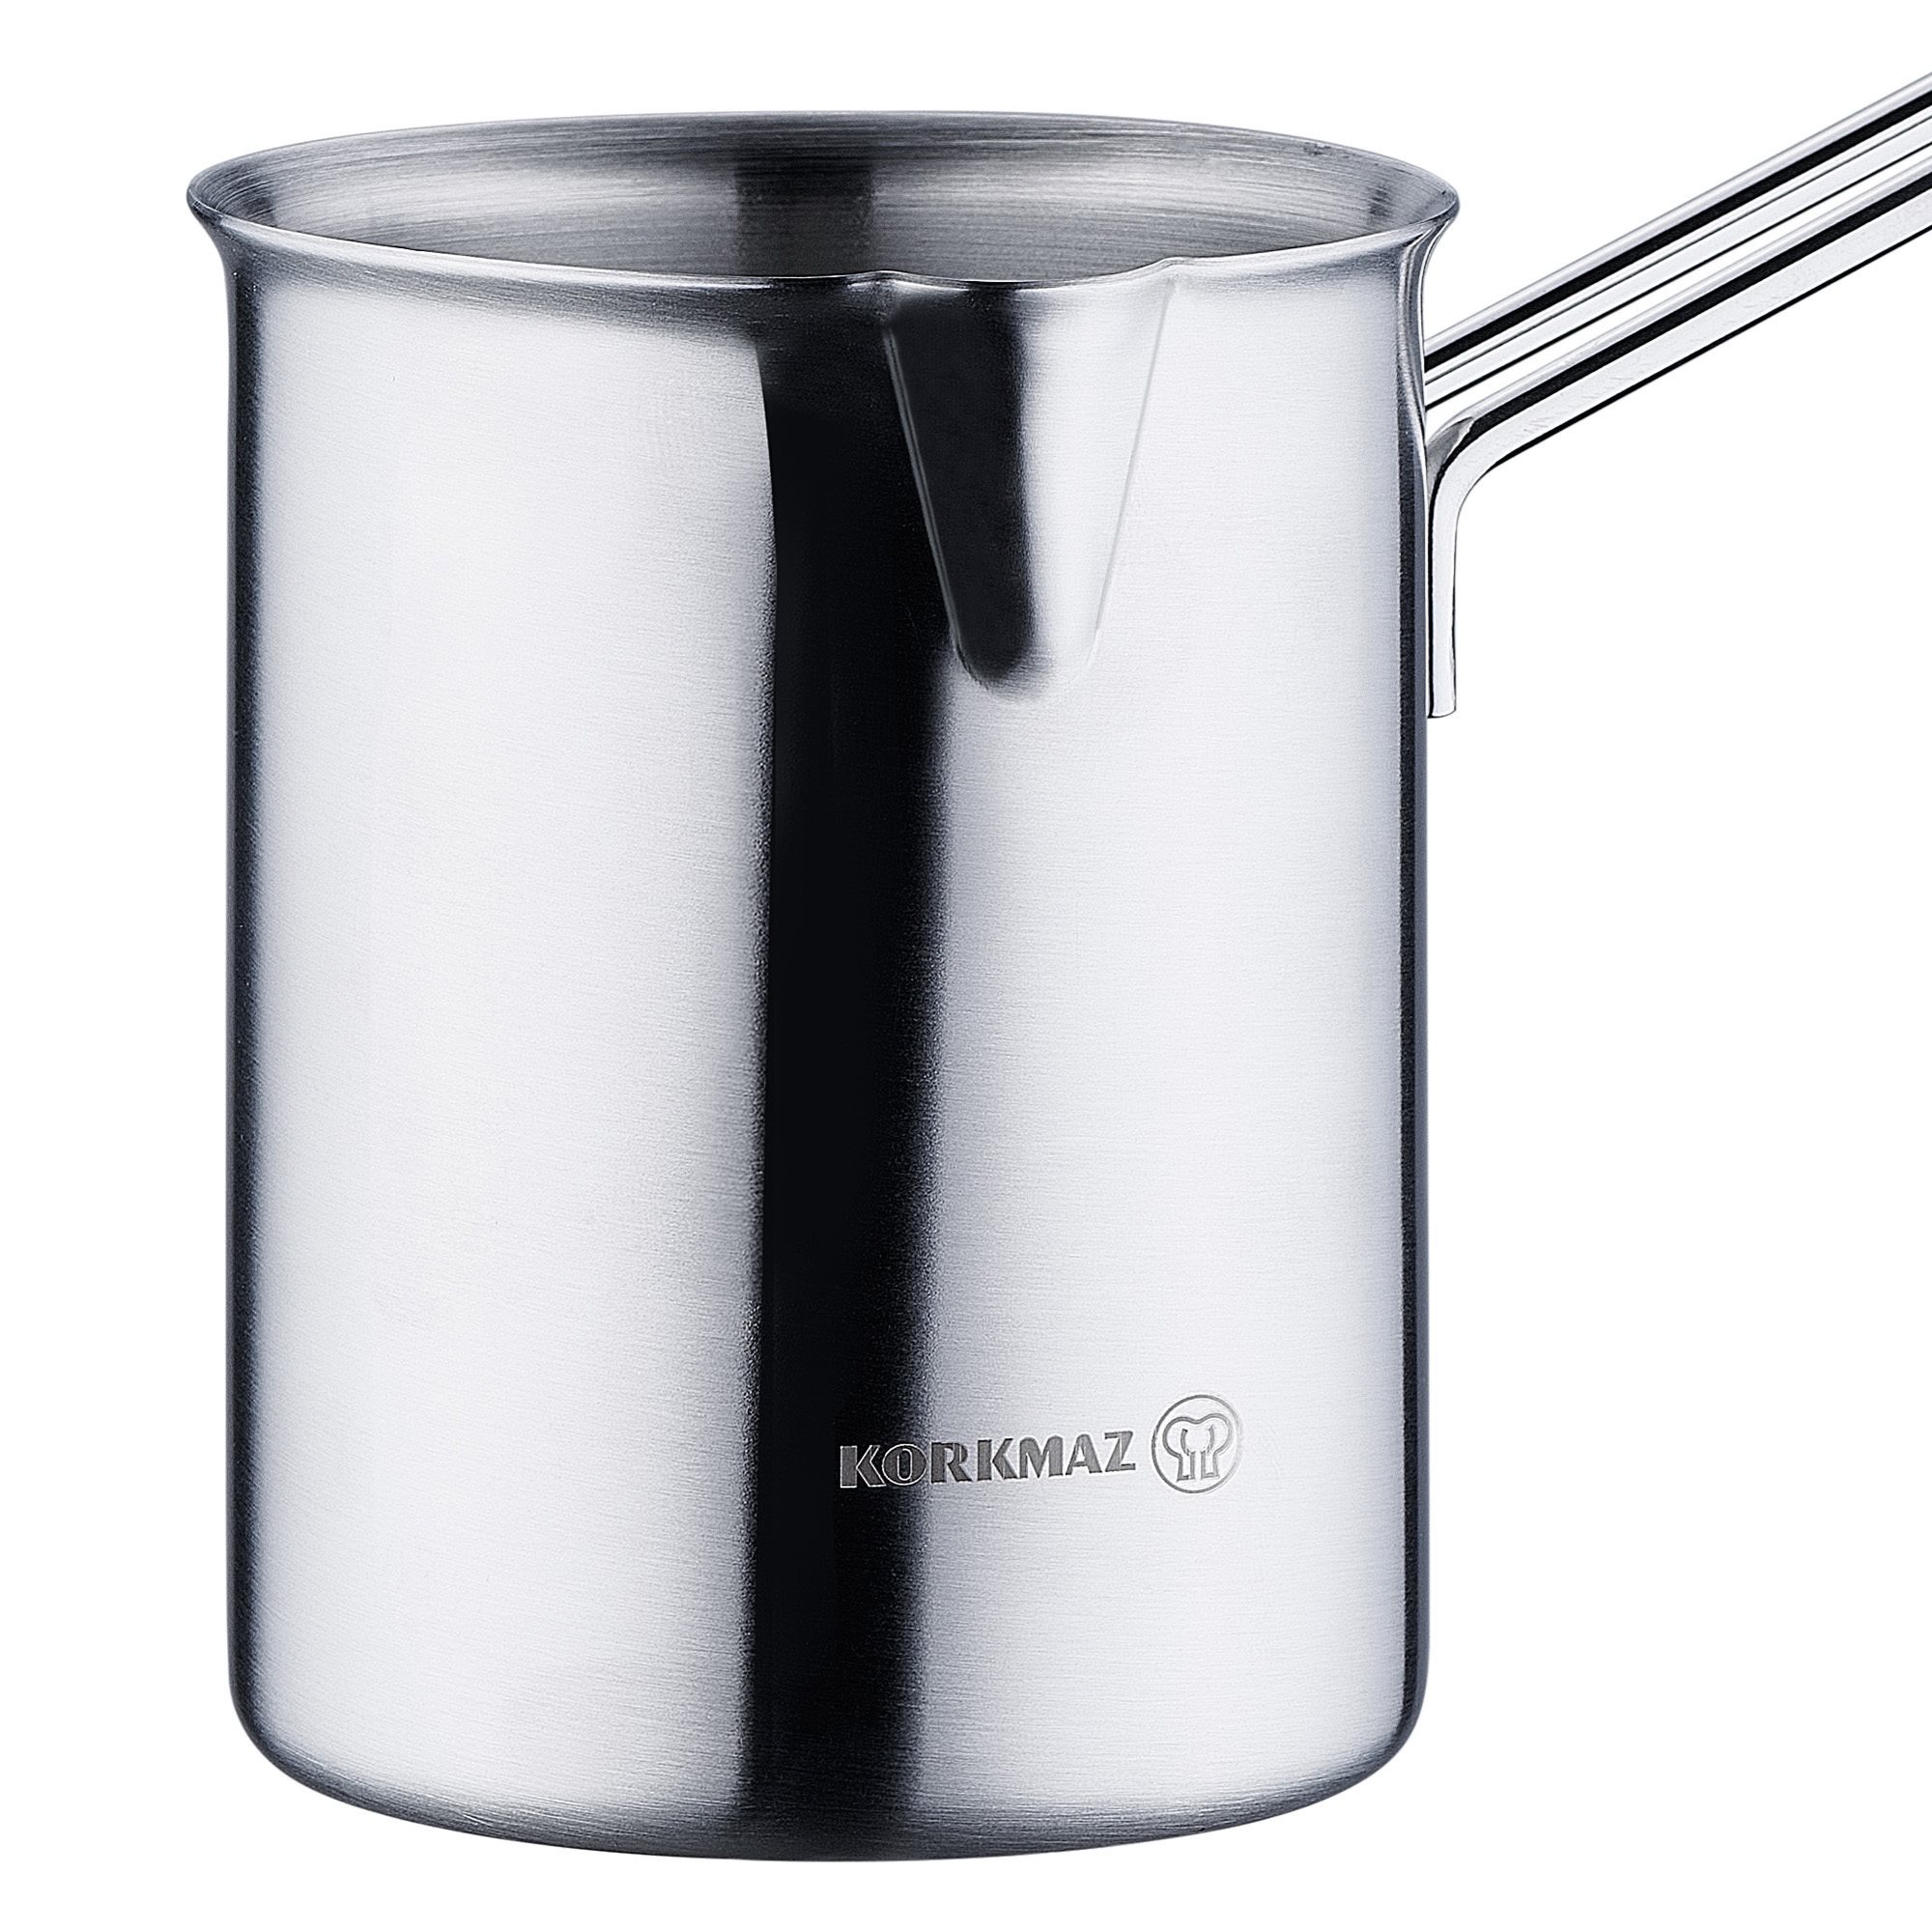 Cooking pot with lid, stainless steel, 28cm/14.5L, Proline - Korkmaz